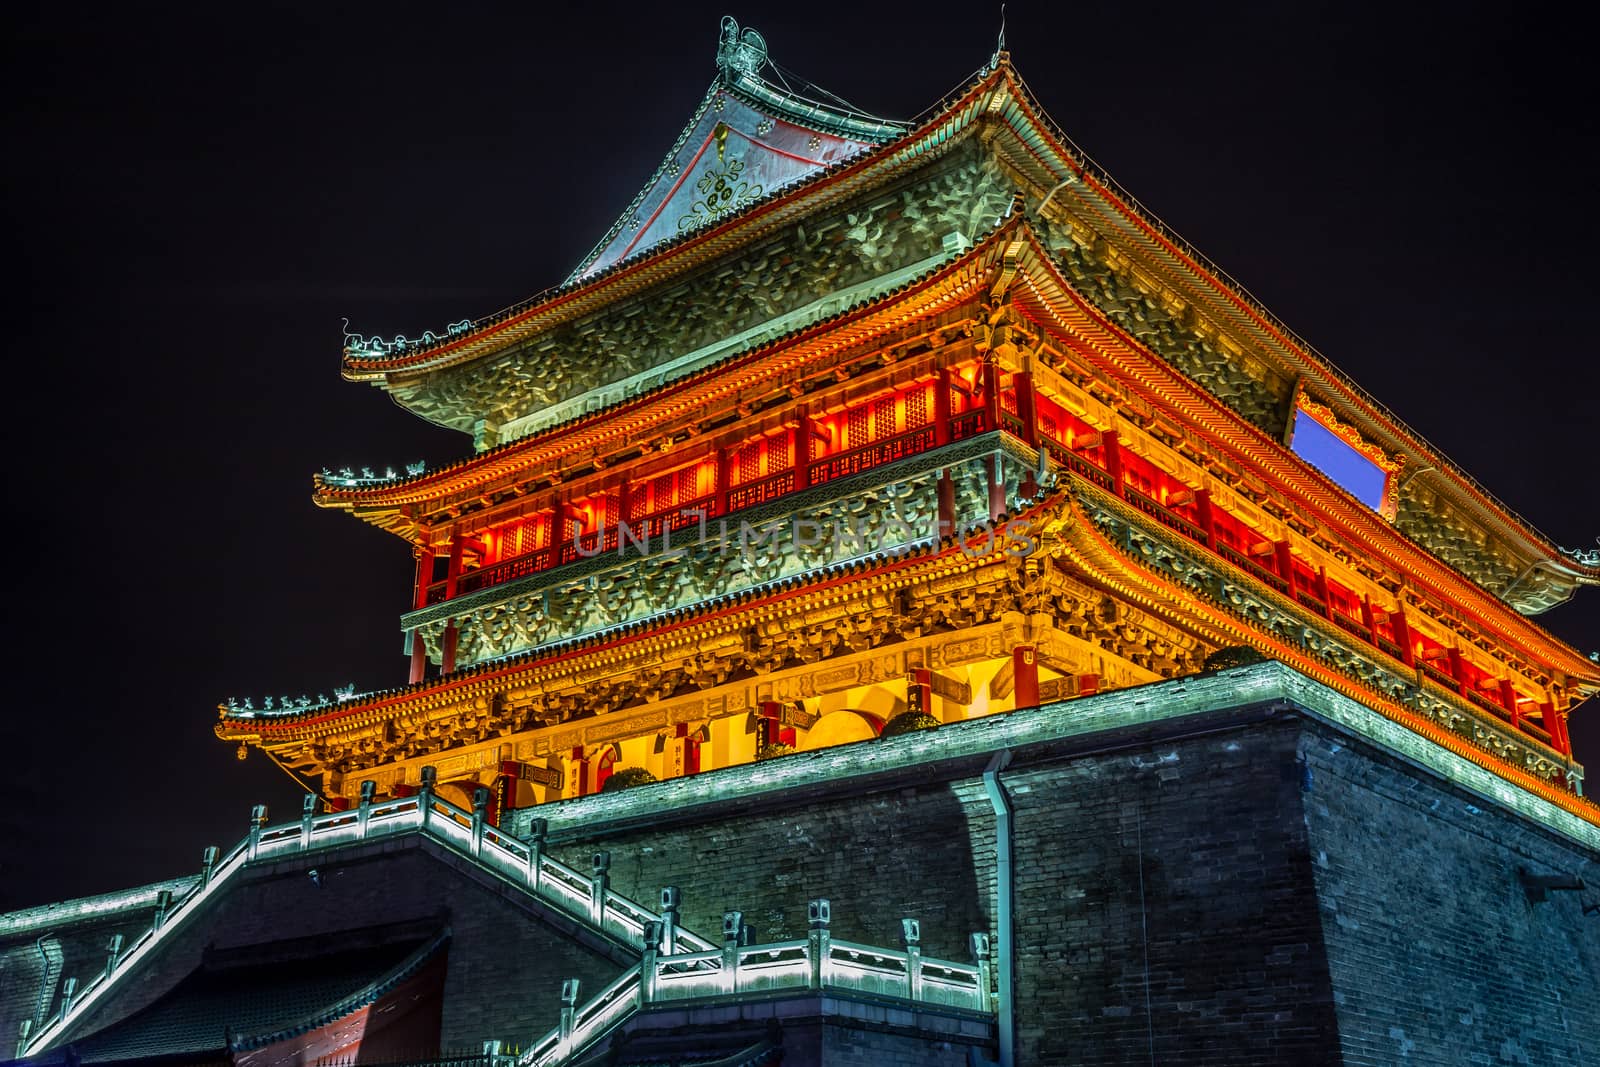 Illuminated Bell Tower temple of Xi'an, night scene, Xian, Shaan by ambeon